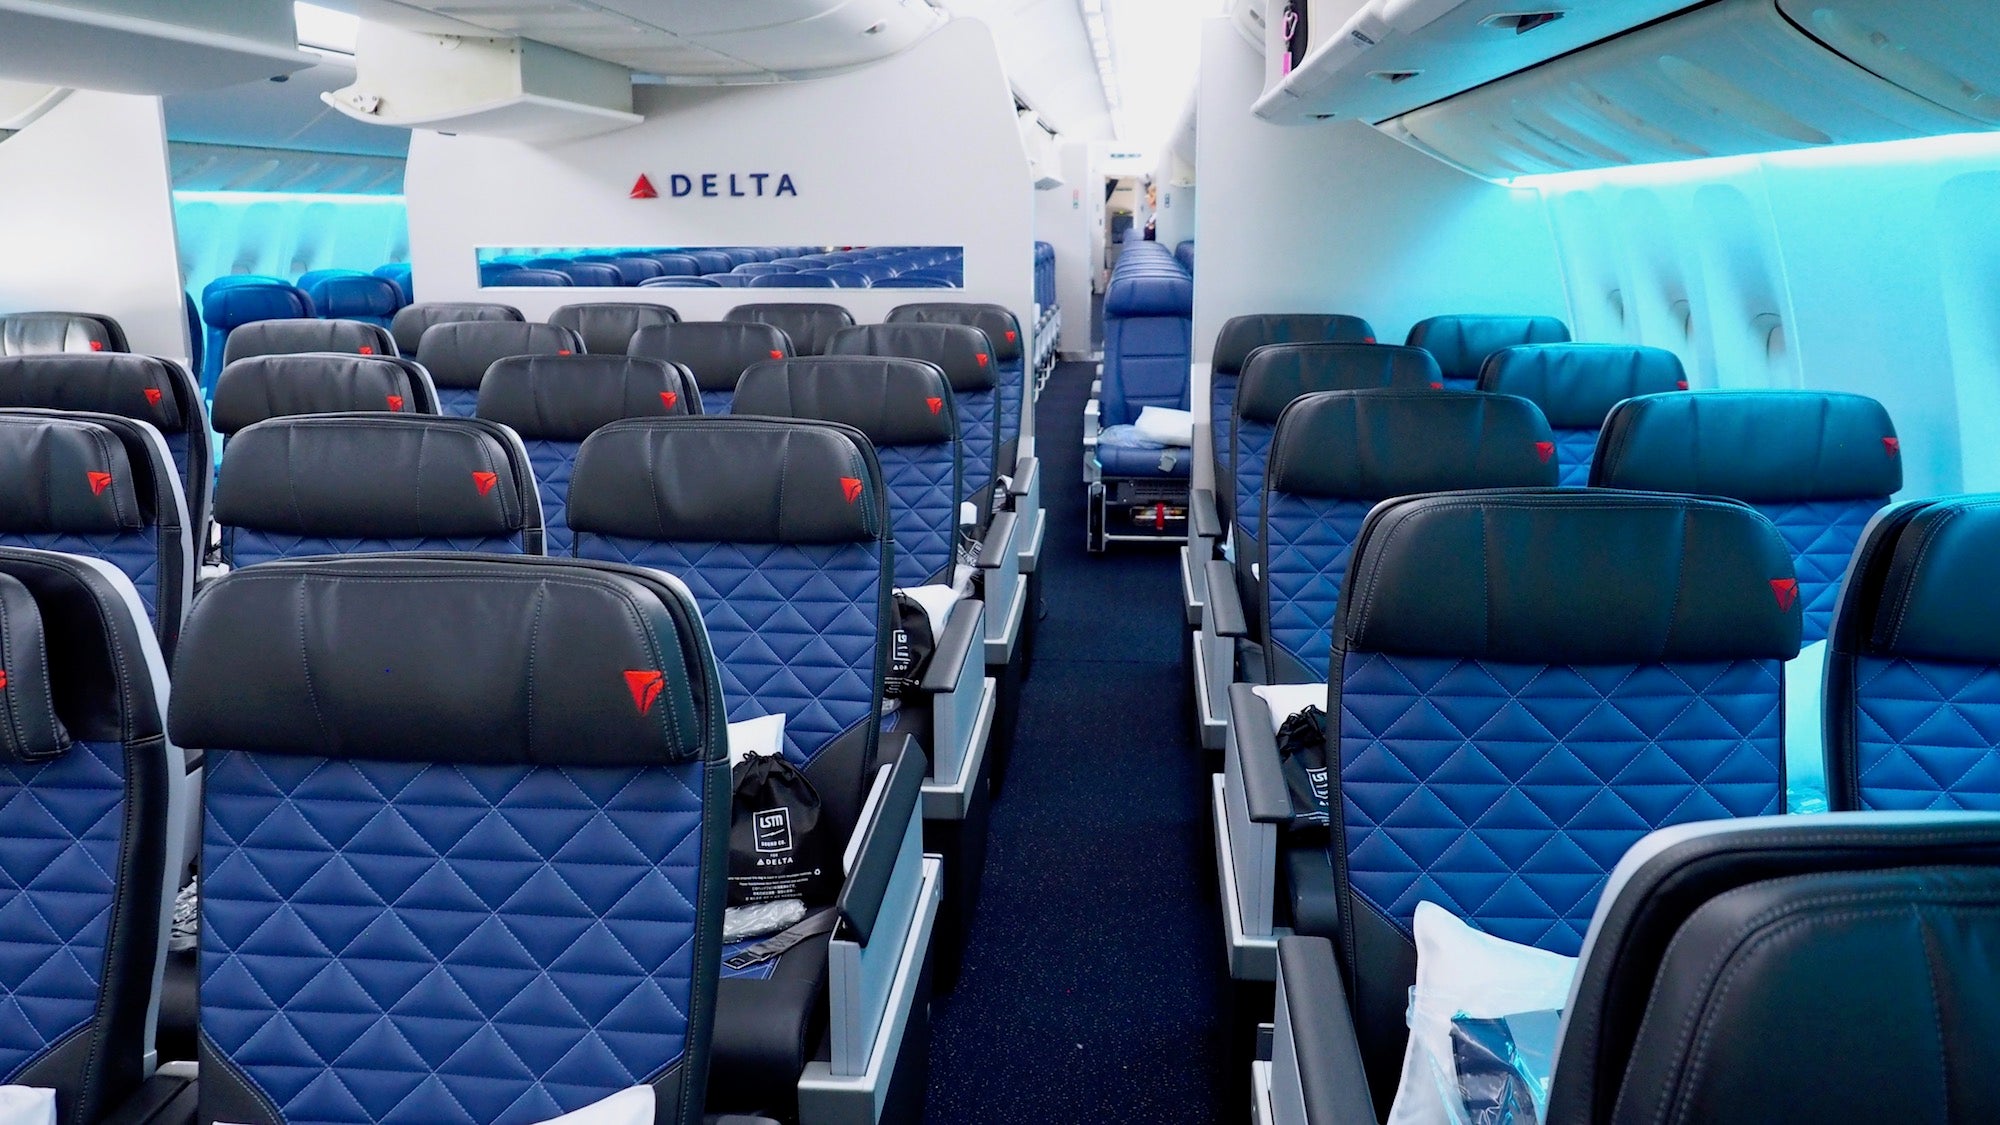 Review: Delta Premium Select on the First Retrofitted 777 - The